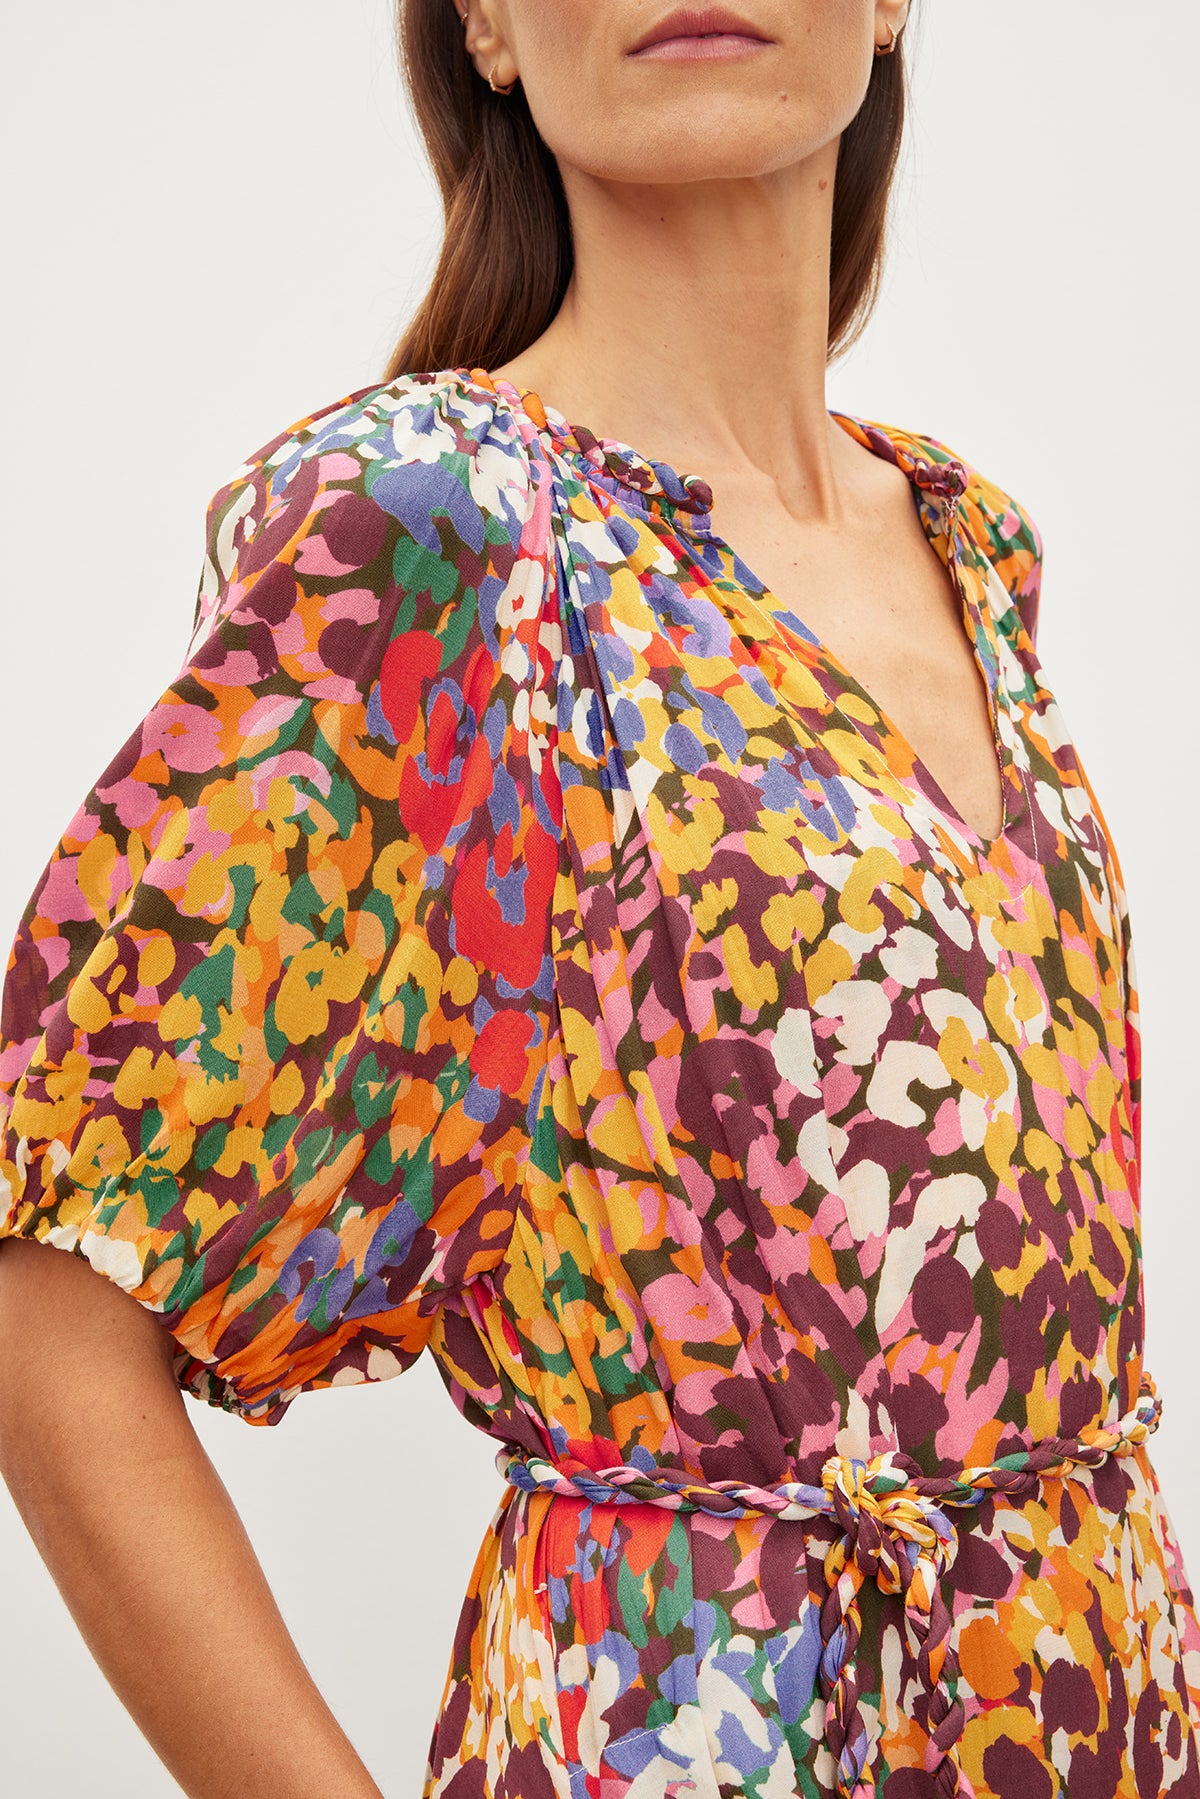   Close-up of a woman wearing a colorful floral printed viscose dress with puff sleeves and a detachable twist braid belt. Only the lower half of her face is visible, in the CAROL PRINTED BOHO DRESS by Velvet by Graham & Spencer. 